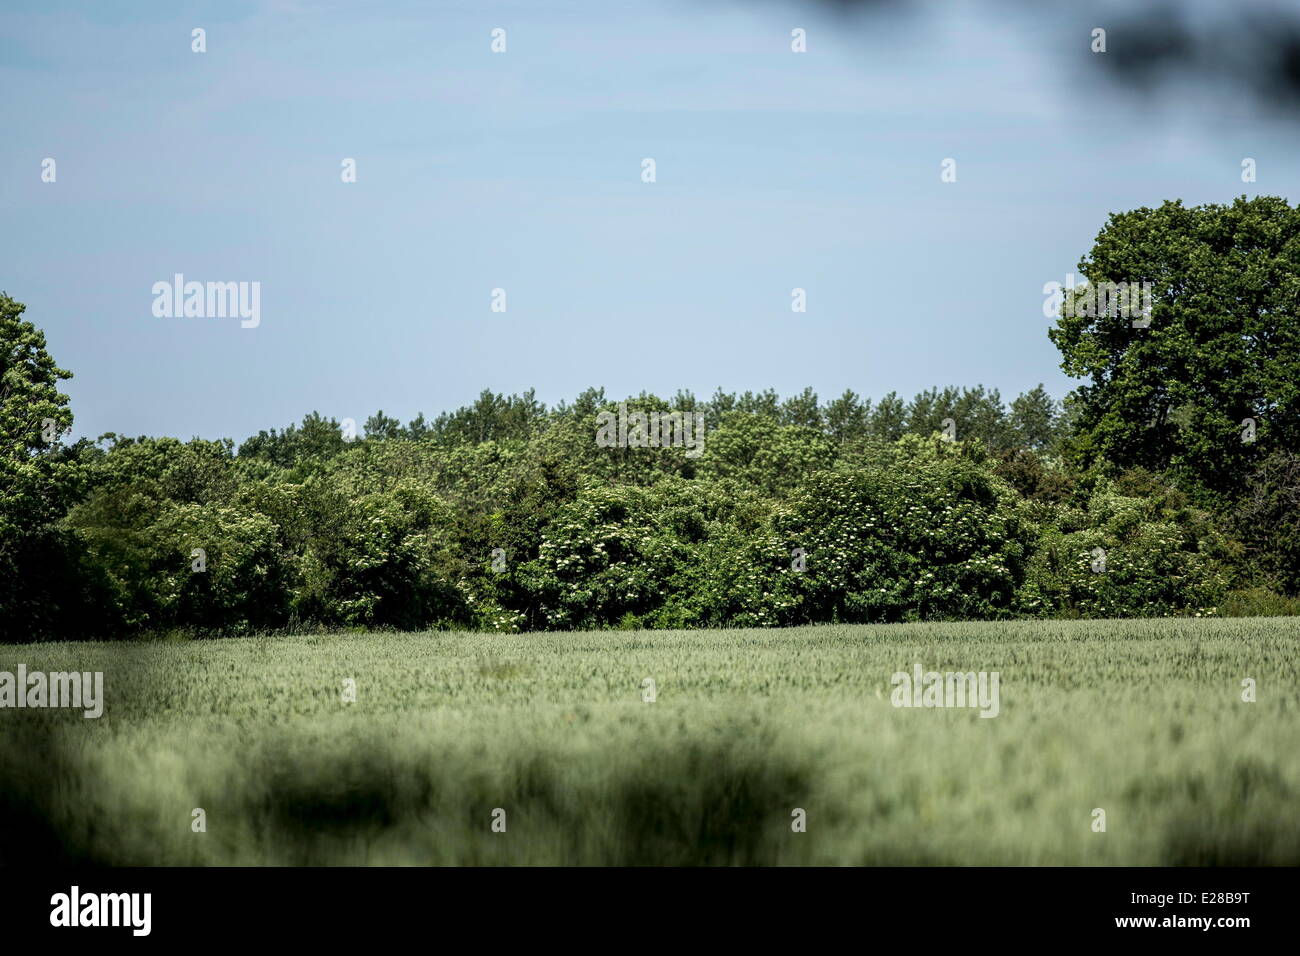 Normandy, France. 6th June, 2014. A farm field where the 101st Airborne Division set up a hospital in Normandy, France, June 6, 2014. The division set up a hospital to treat wounded paratroopers who parachuted into Normandy to start Operation Overlord, also known as D Day, on June 6, 1944. Thousands of people visited the region to commemorate the invasion's anniversary. This year marks the 70th anniversary of the landings that liberated France and ended the war in Europe. © Bill Putnam/ZUMA Wire/ZUMAPRESS.com/Alamy Live News Stock Photo